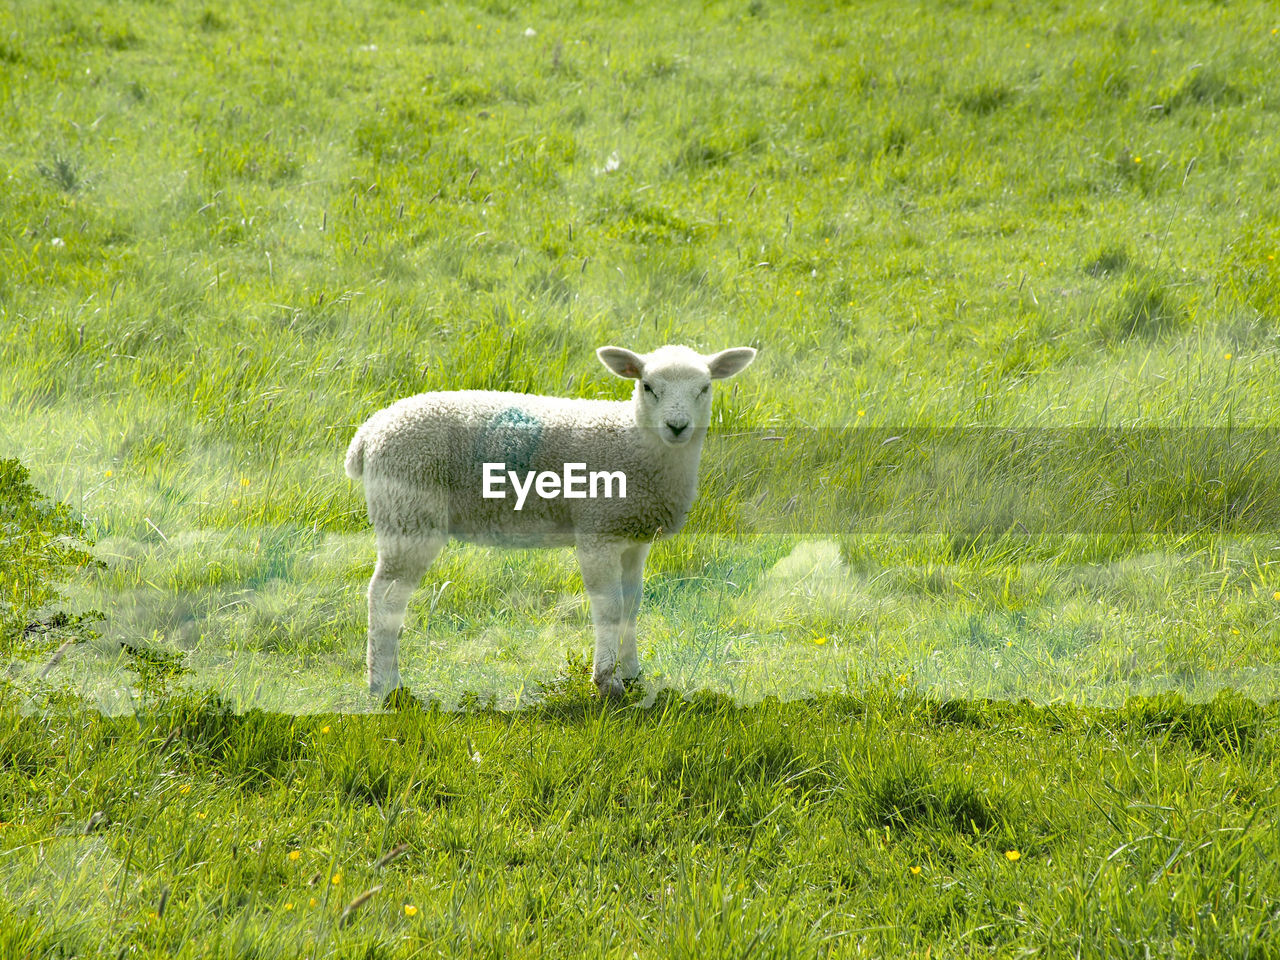 SHEEP STANDING IN A FIELD